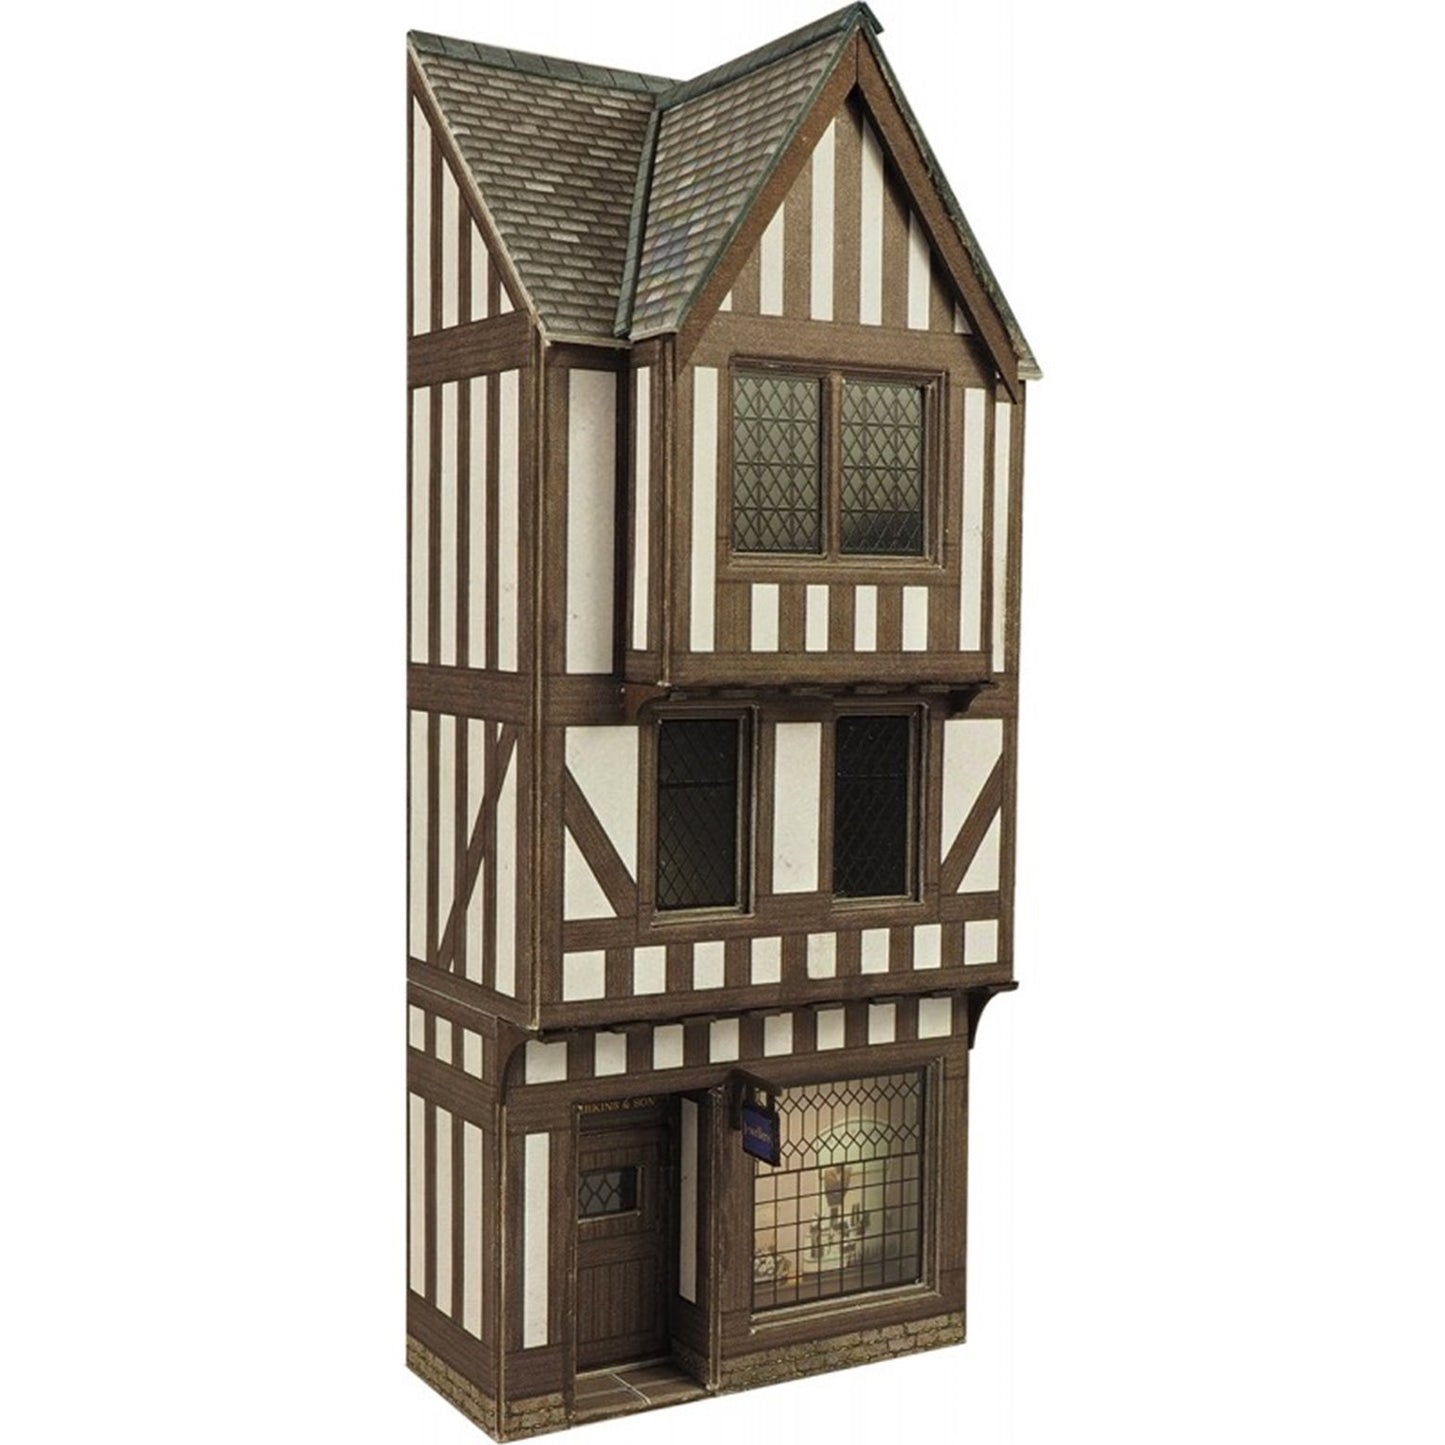 Low Relief Timber Framed Shop